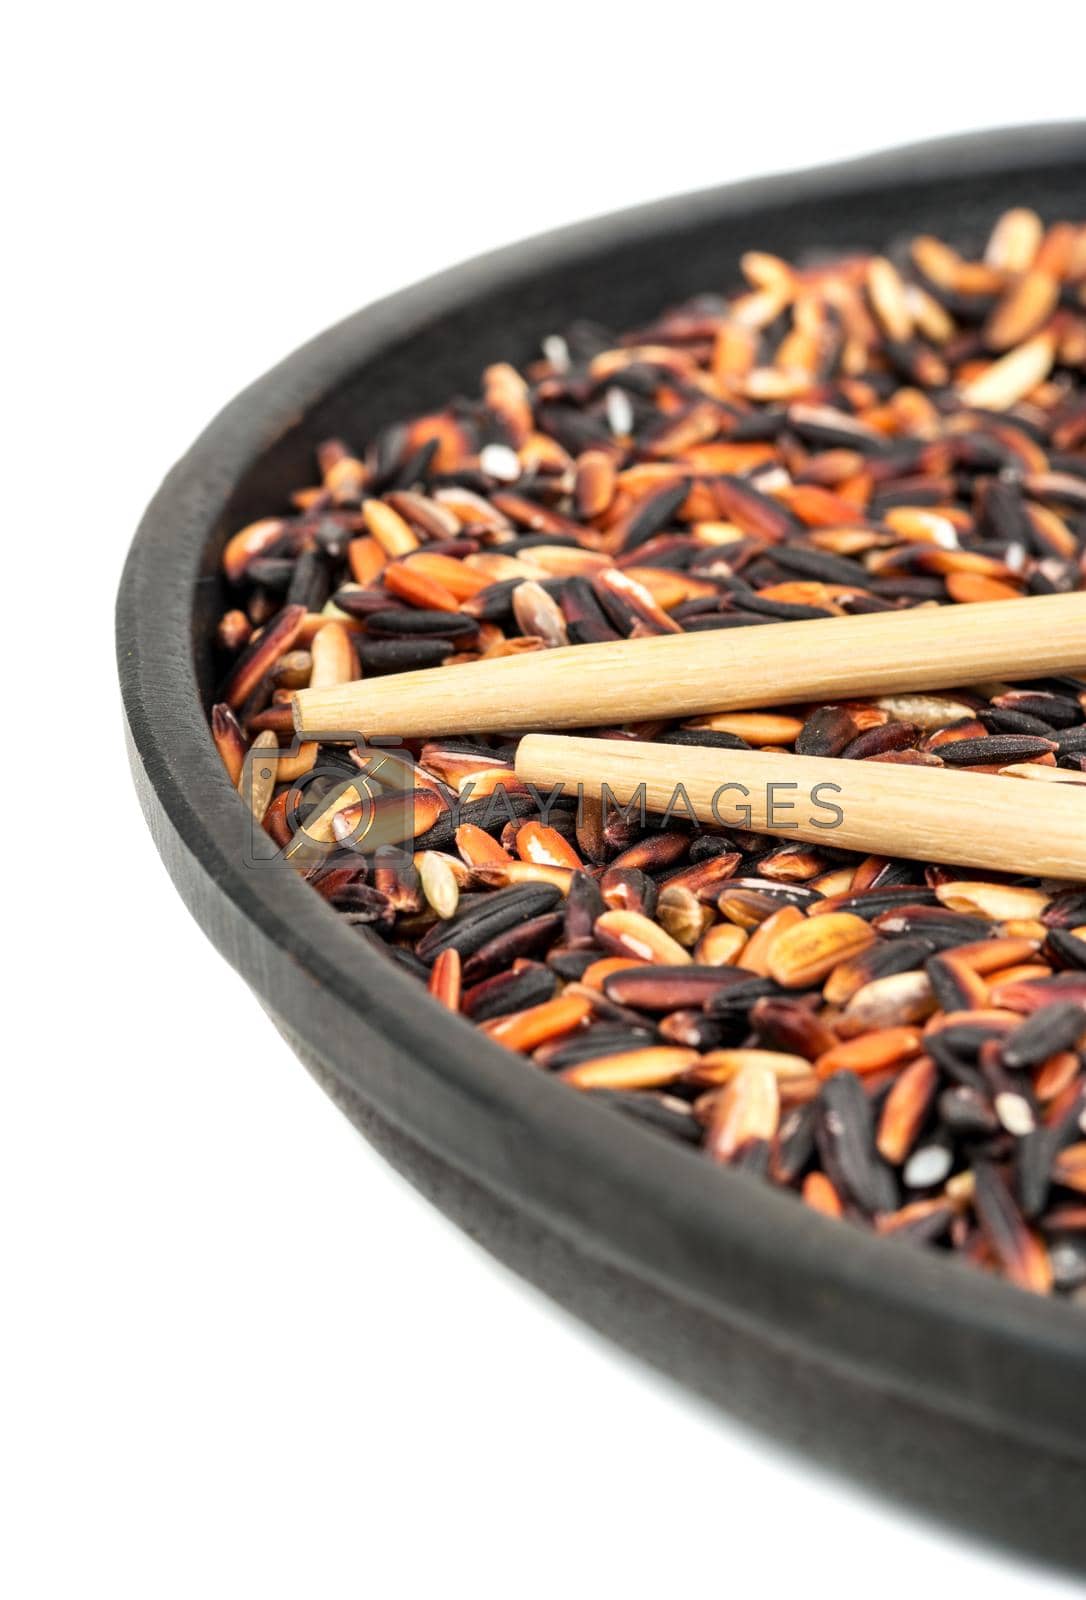 Royalty free image of Wild rice in pan by andregric